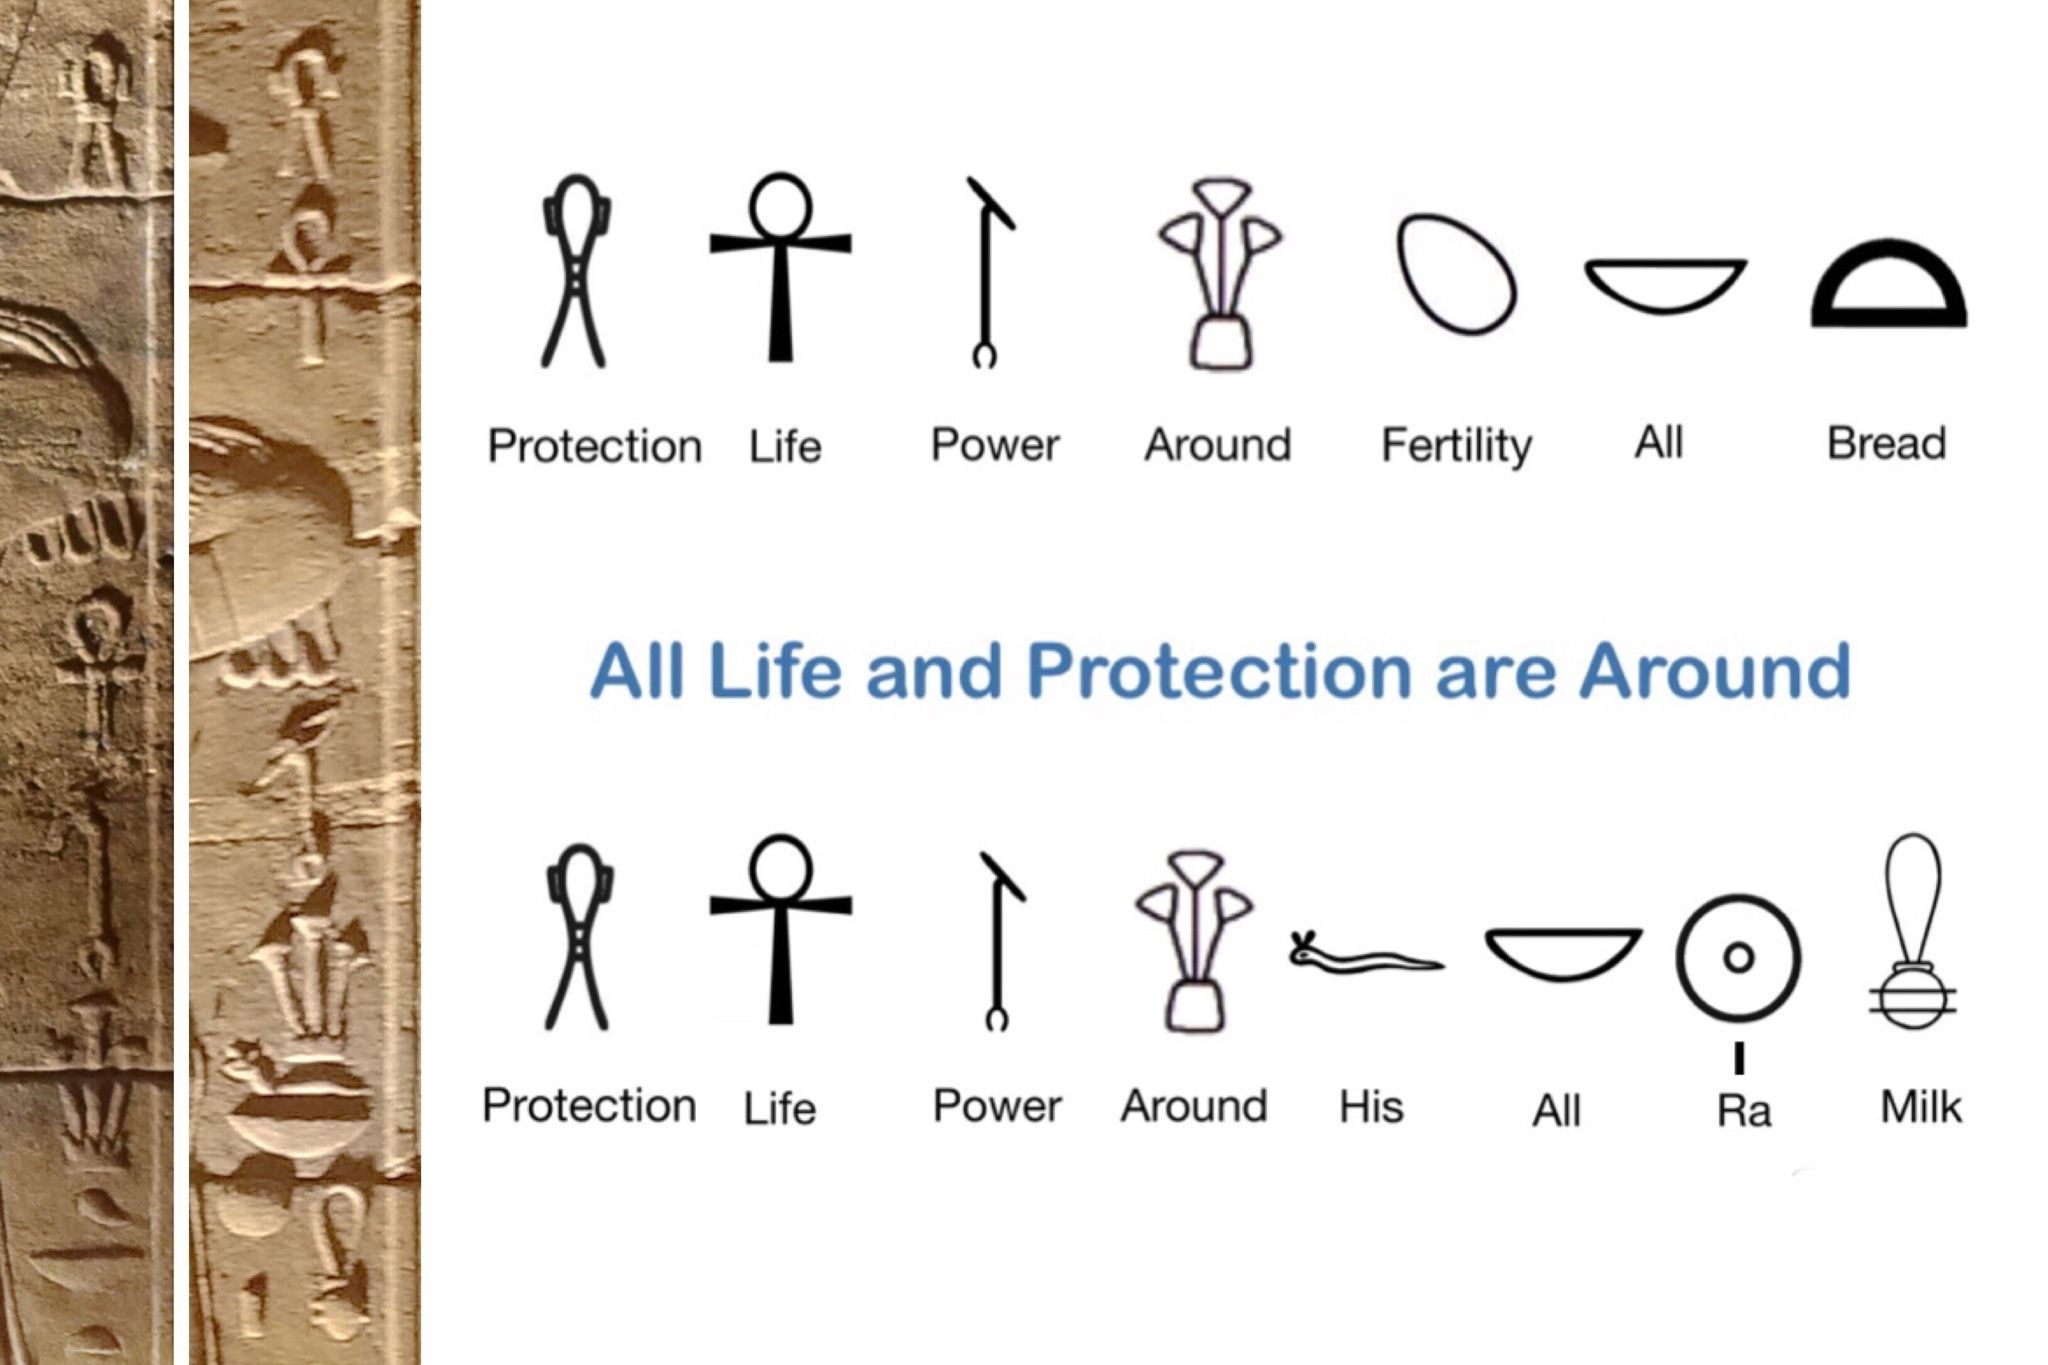 The Ancient Egyptian Symbol Of Life The Ankh s Meaning Significance